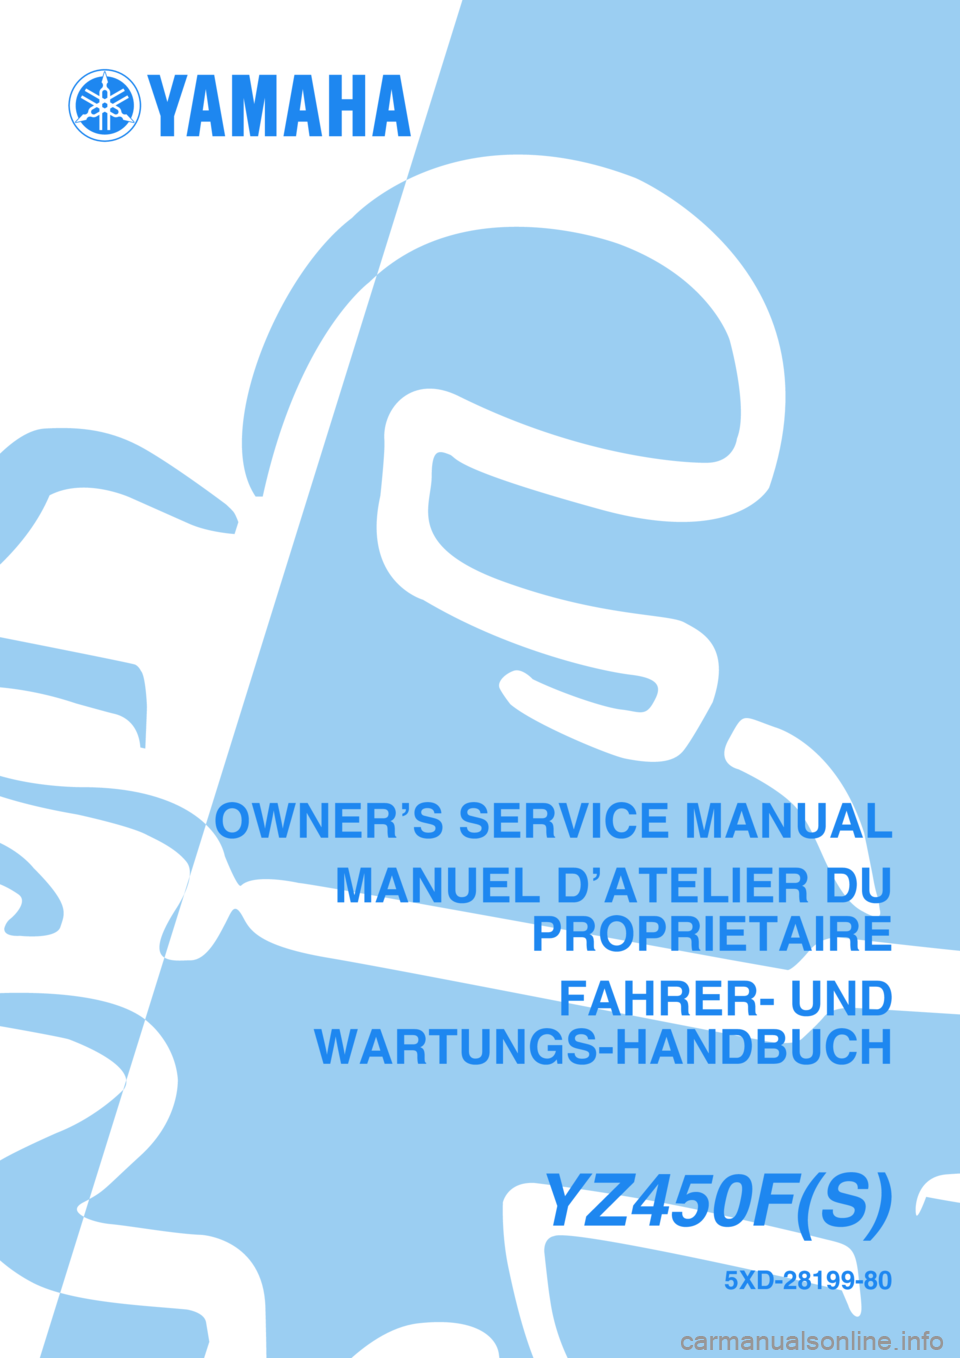 YAMAHA YZ450F 2004  Owners Manual 5XD-28199-80
YZ450F(S)
OWNER’S SERVICE MANUAL
MANUEL D’ATELIER DU
PROPRIETAIRE
FAHRER- UND
WARTUNGS-HANDBUCH 